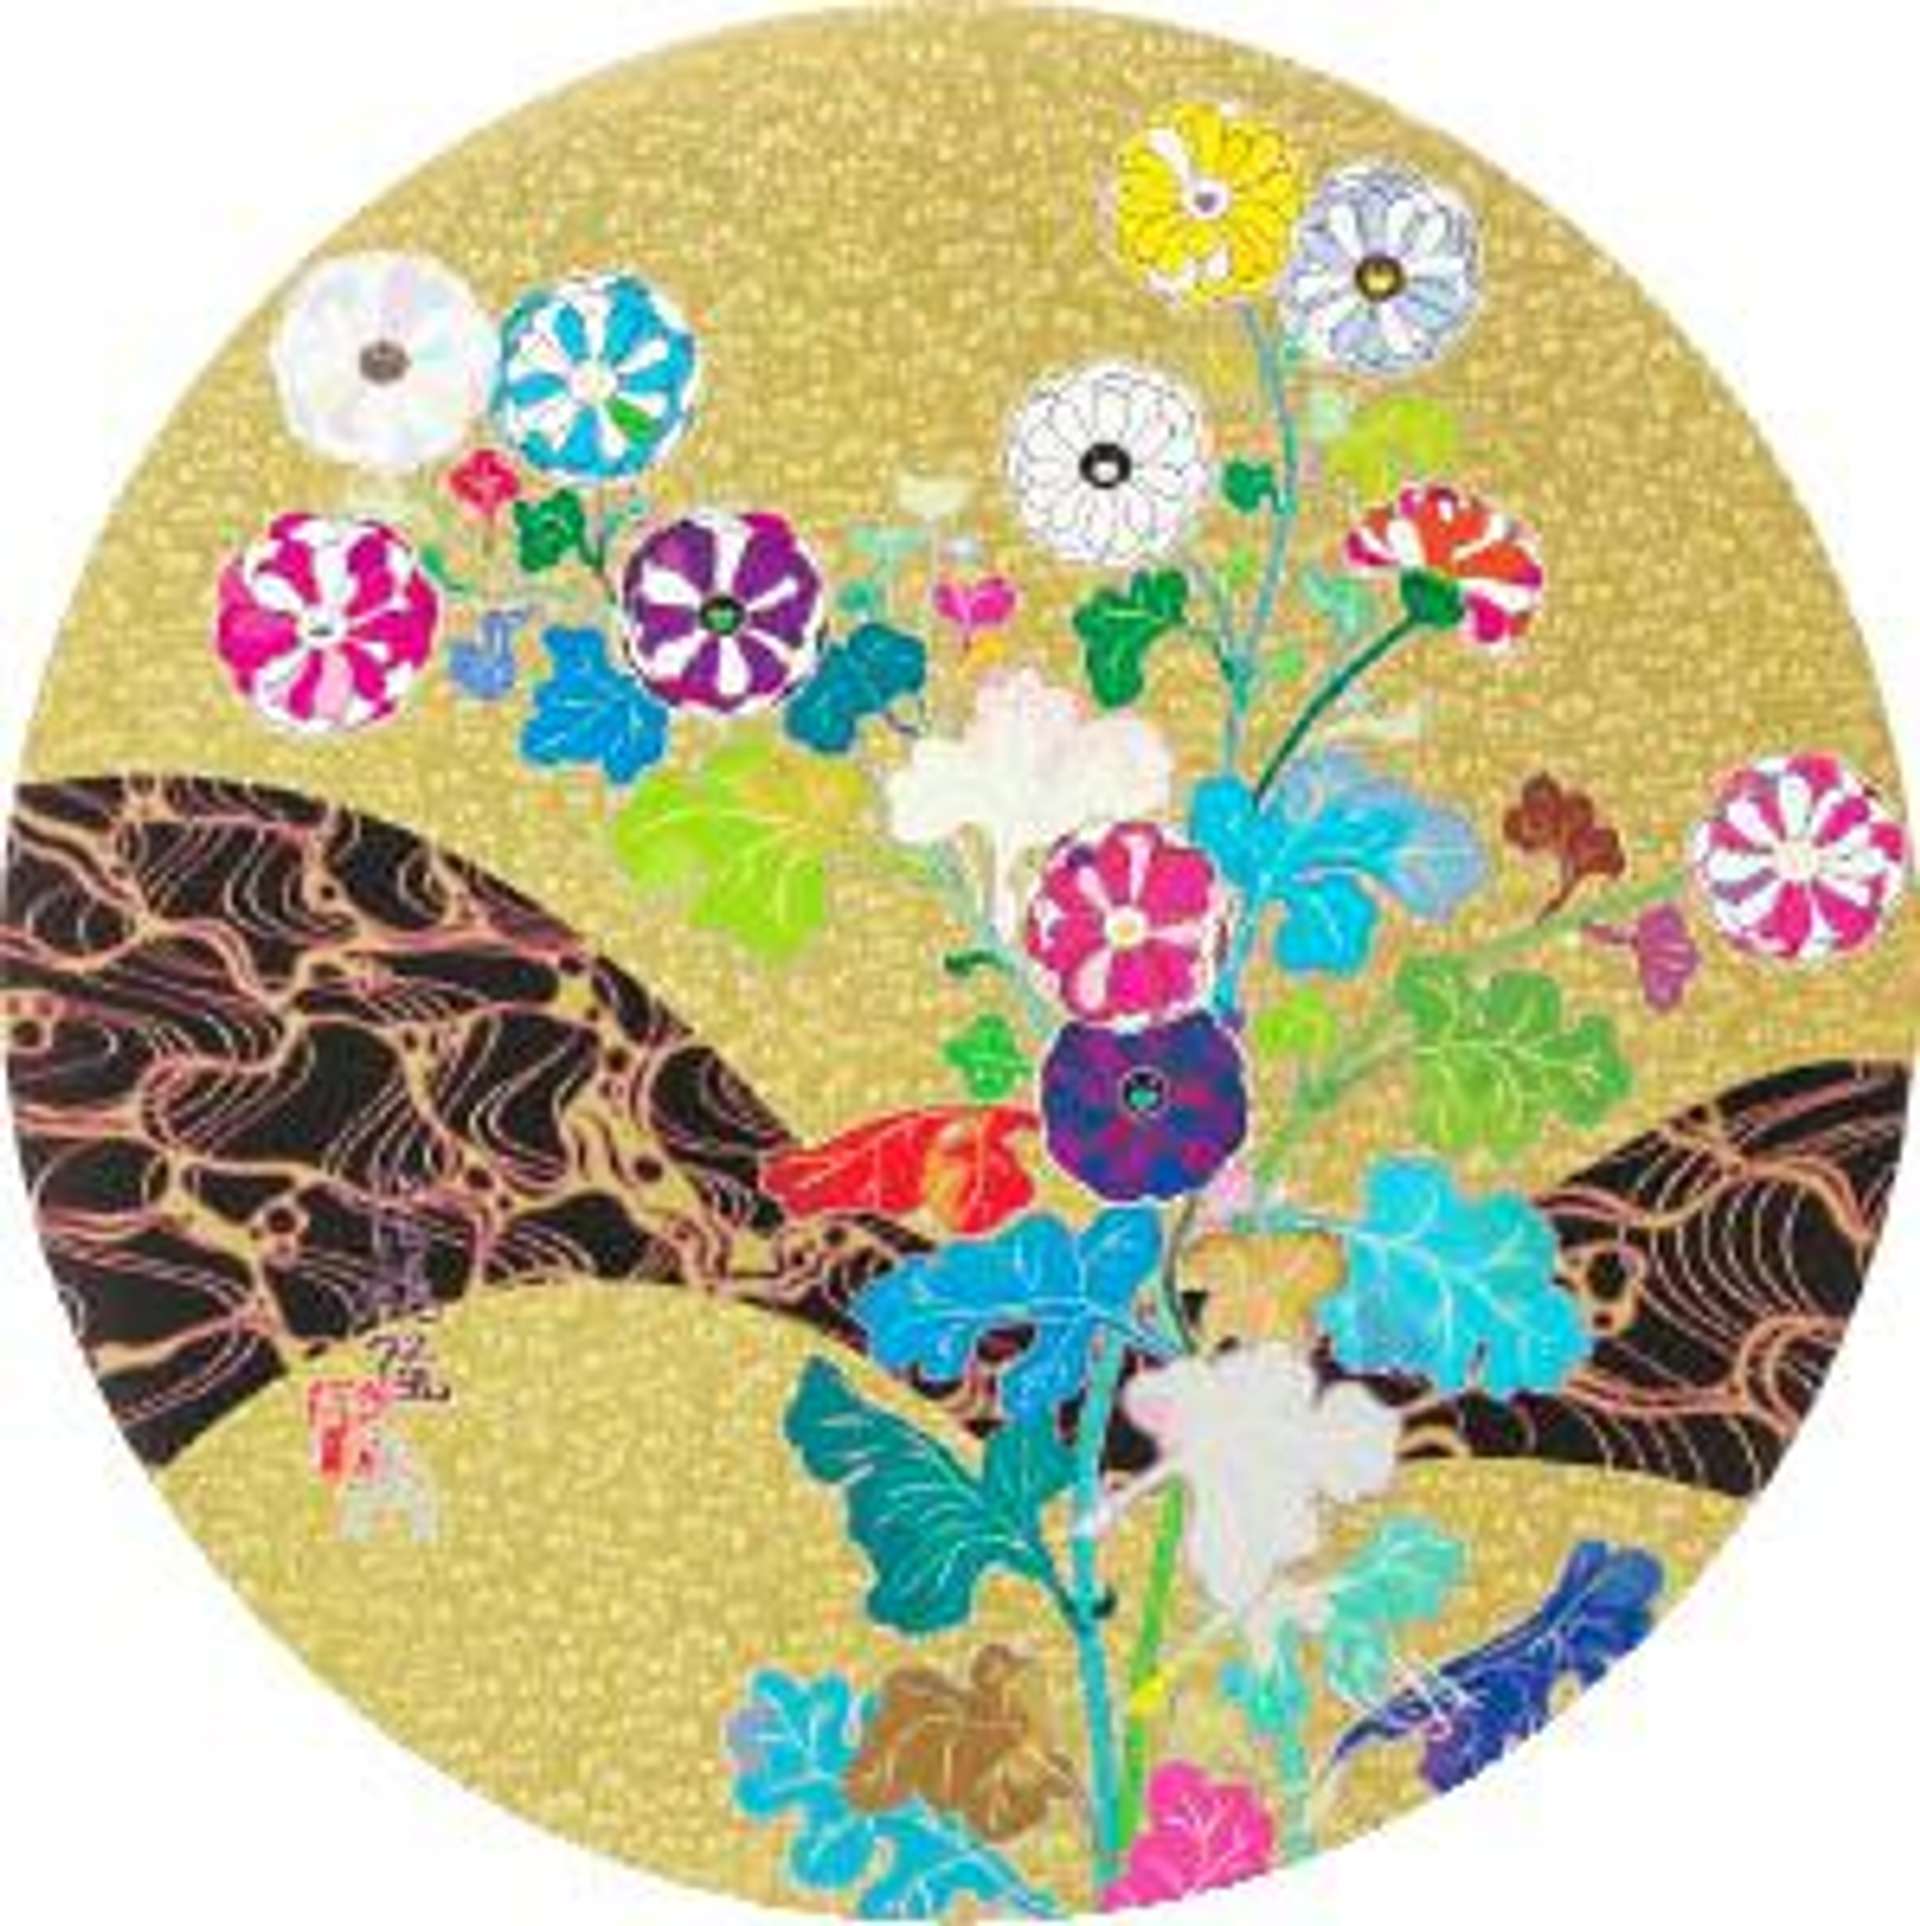 An image of the print The Golden Age Hokkyo Takashi by Takashi Murakami. It shows a round golden circle, with various flowers and abstract motifs within it.